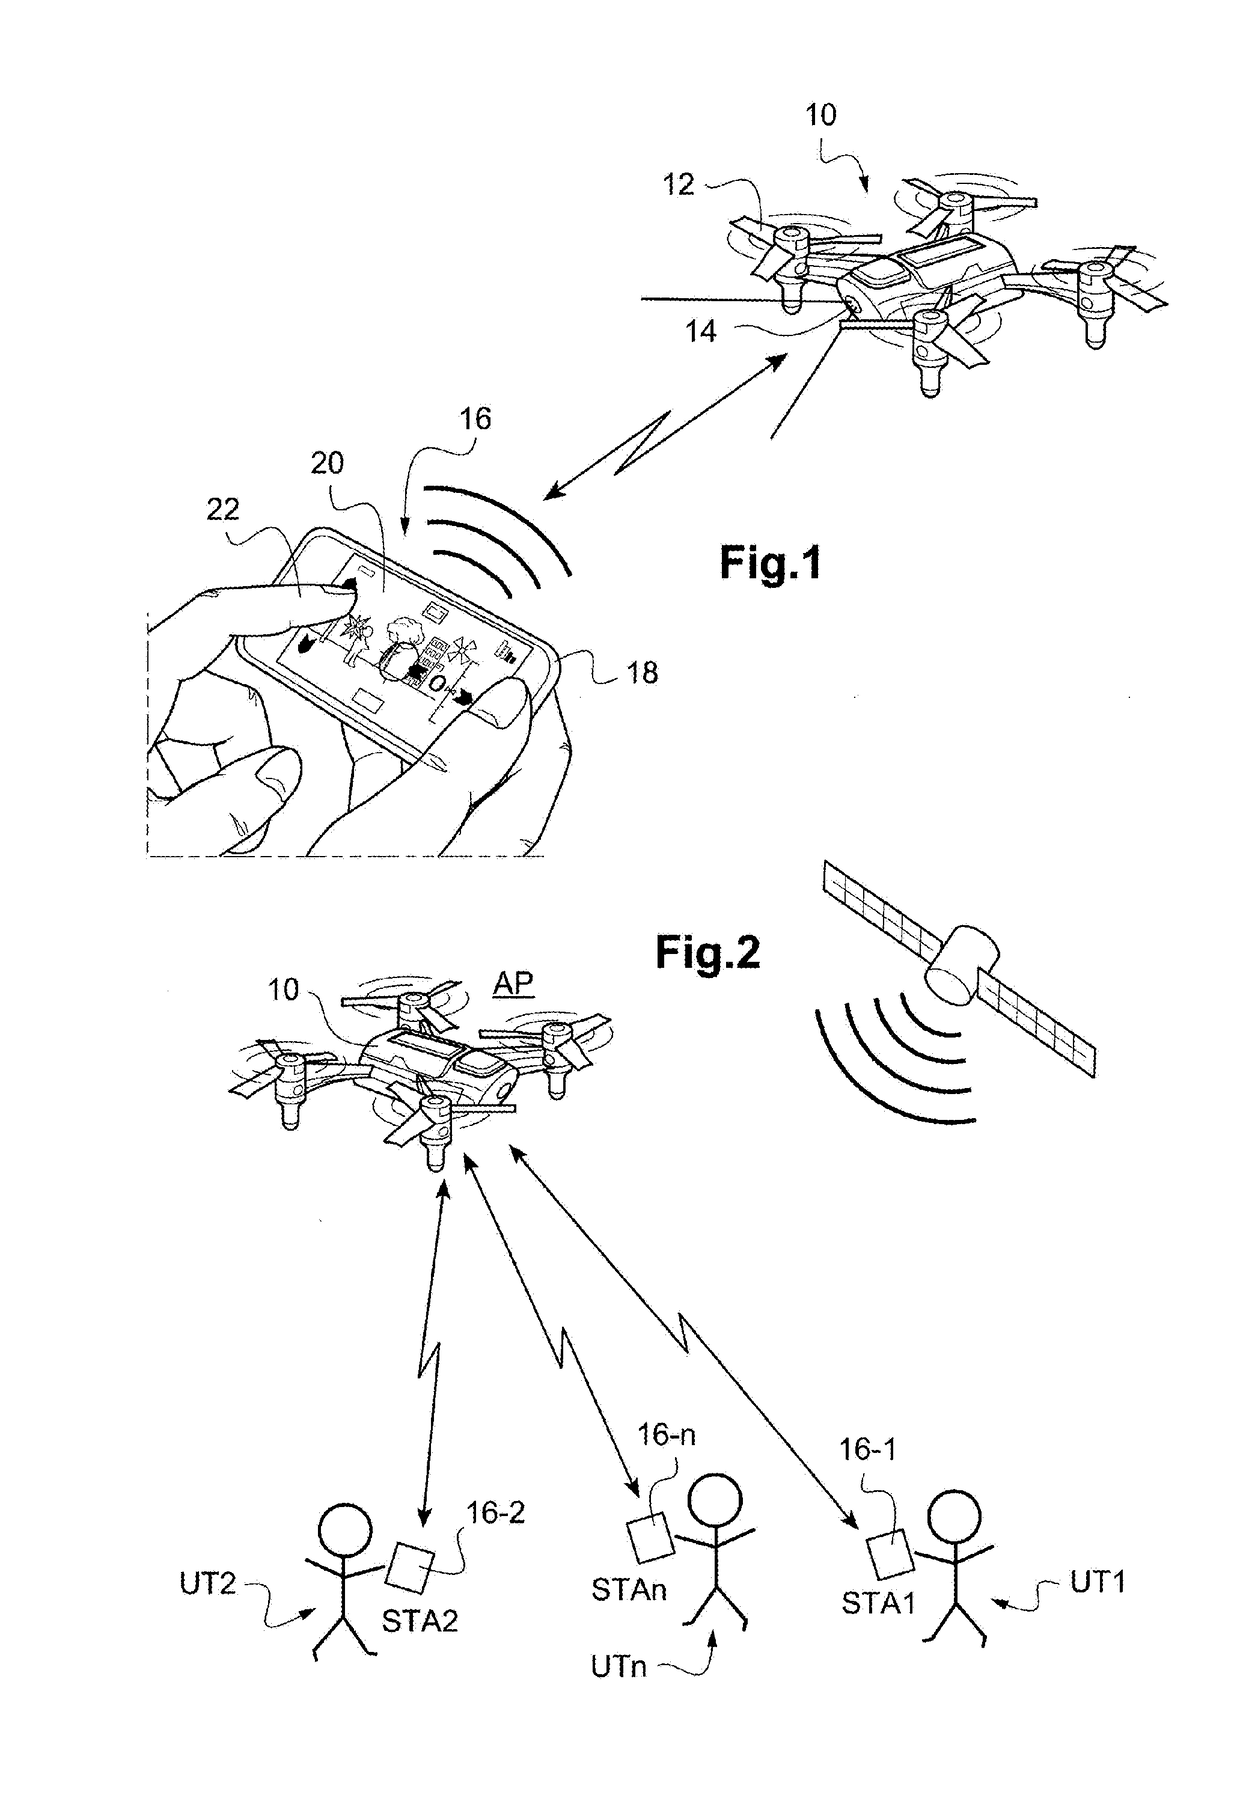 Local network for the simultaneous exchange of data between a drone and a plurality of user terminals